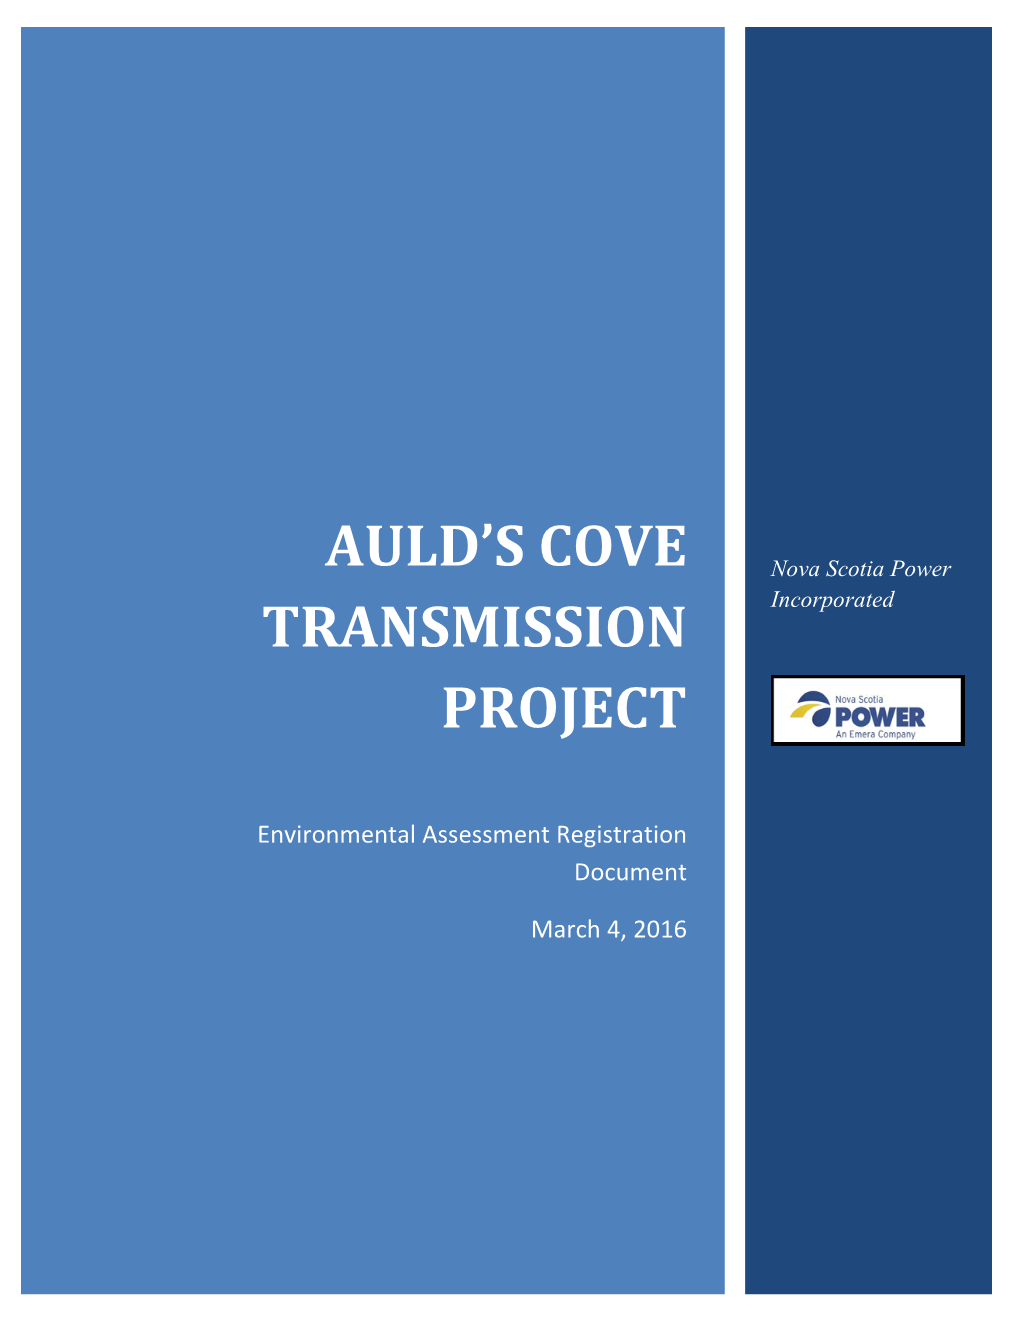 Auld's Cove Transmission Project